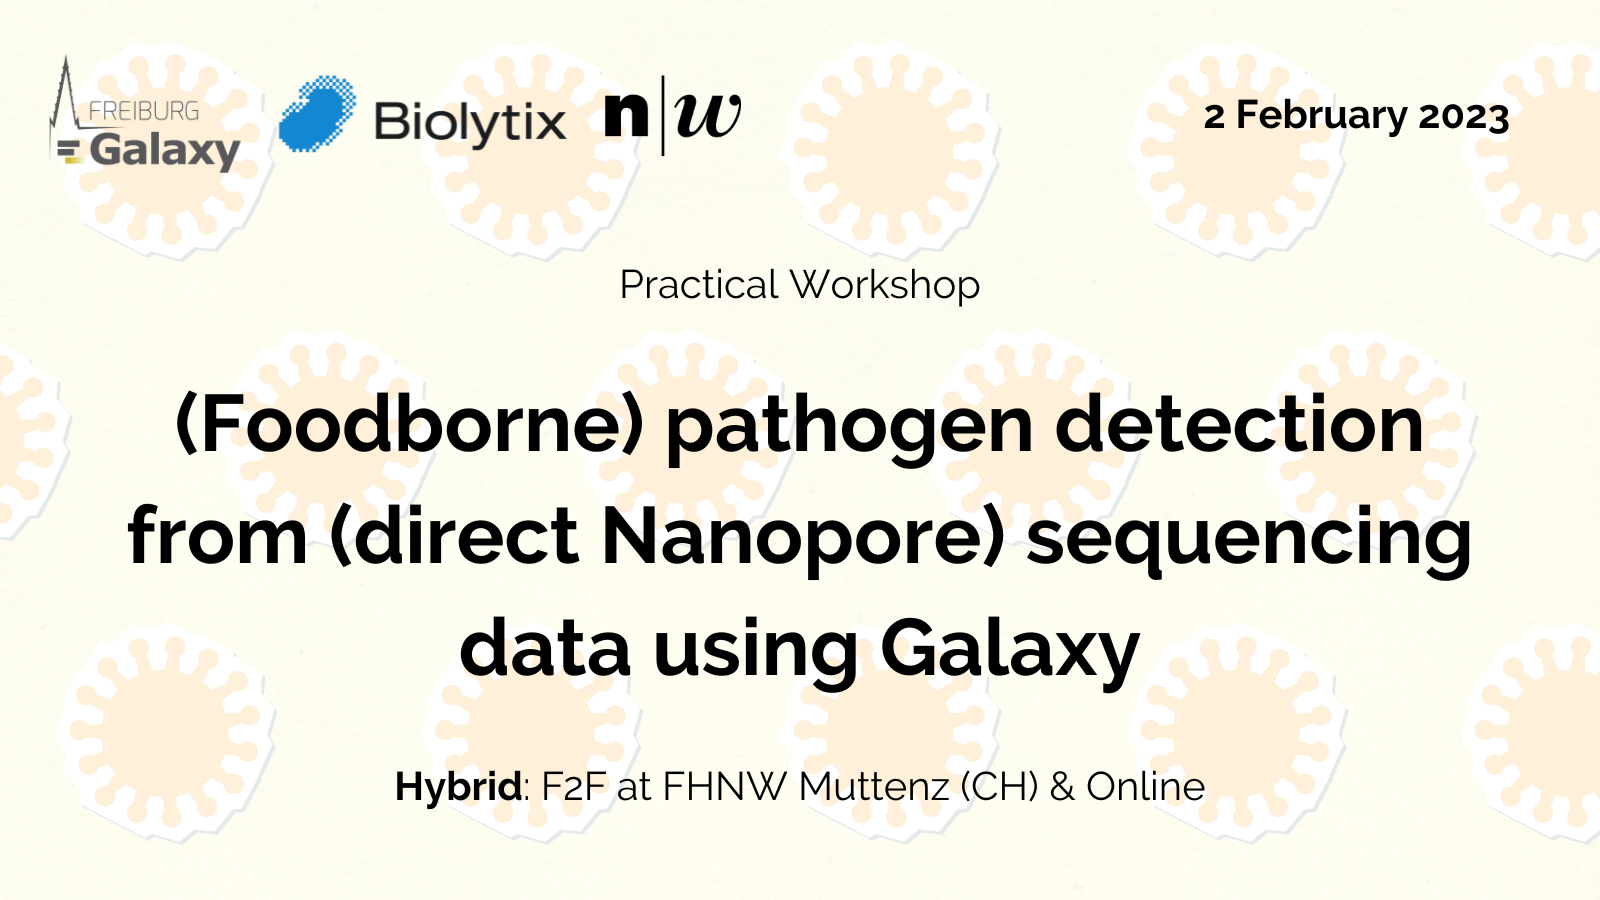 Flyer for the practical workshop for (foodborne) pathogen detection from (direct Nanopore) sequencing data using Galaxy